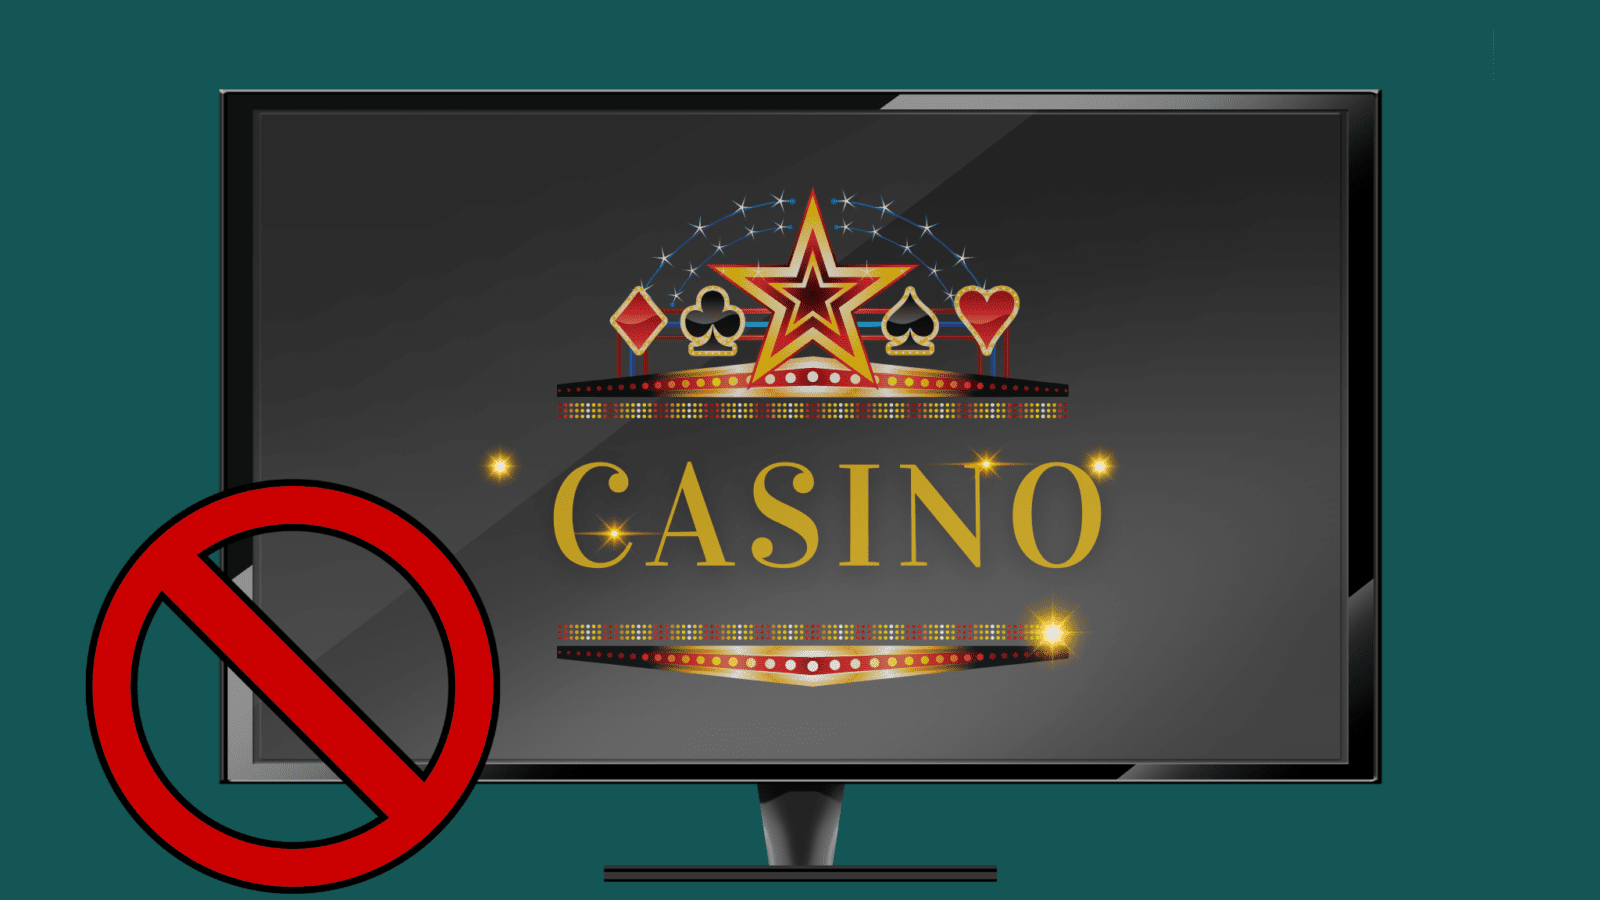 Igaming ads ban Canada